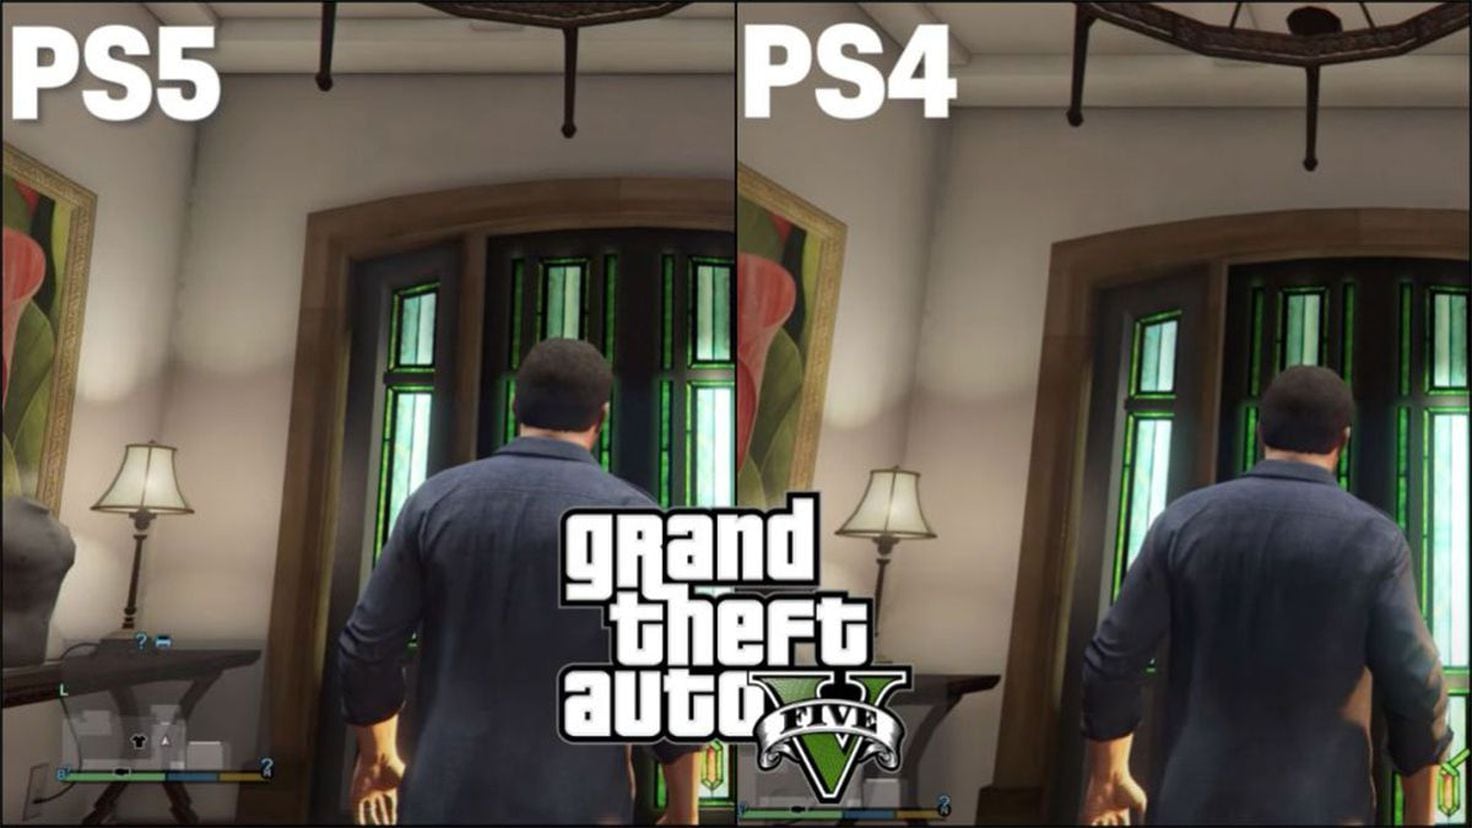 Sommerhus udbytte gys GTA 5 loads three times faster on PS5 than on PS4: time comparison -  Meristation